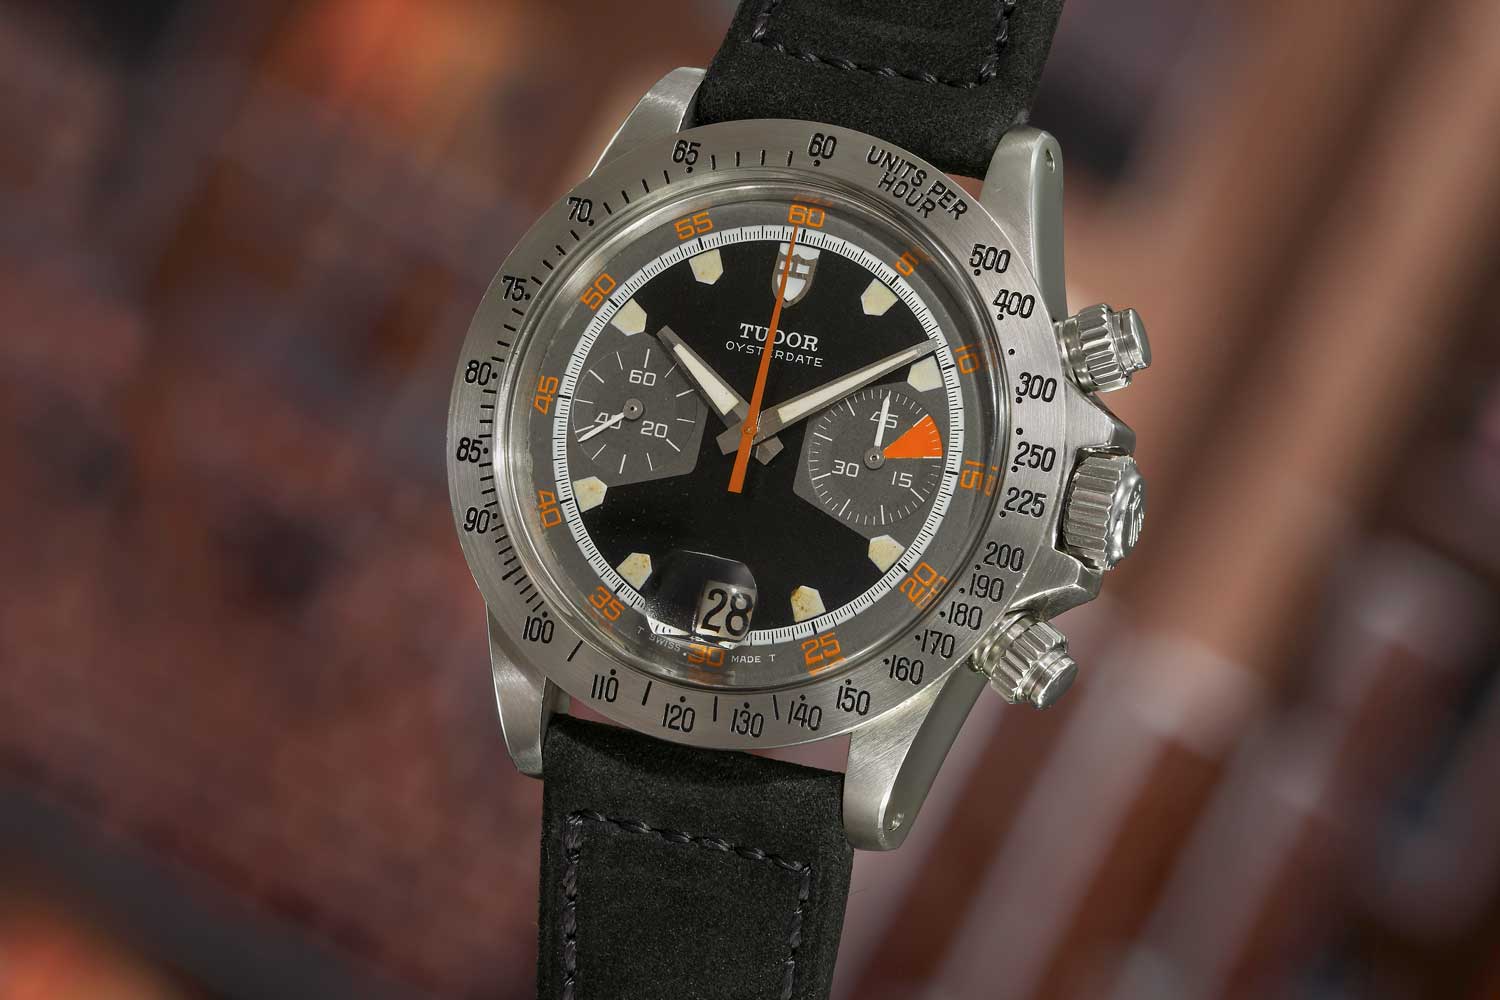 Tudor unveiled the 7000-series watch with the references 7031 and 7032 in 1970. Seen here is the ref. 7032 with black dial (Image: Phillips.com)